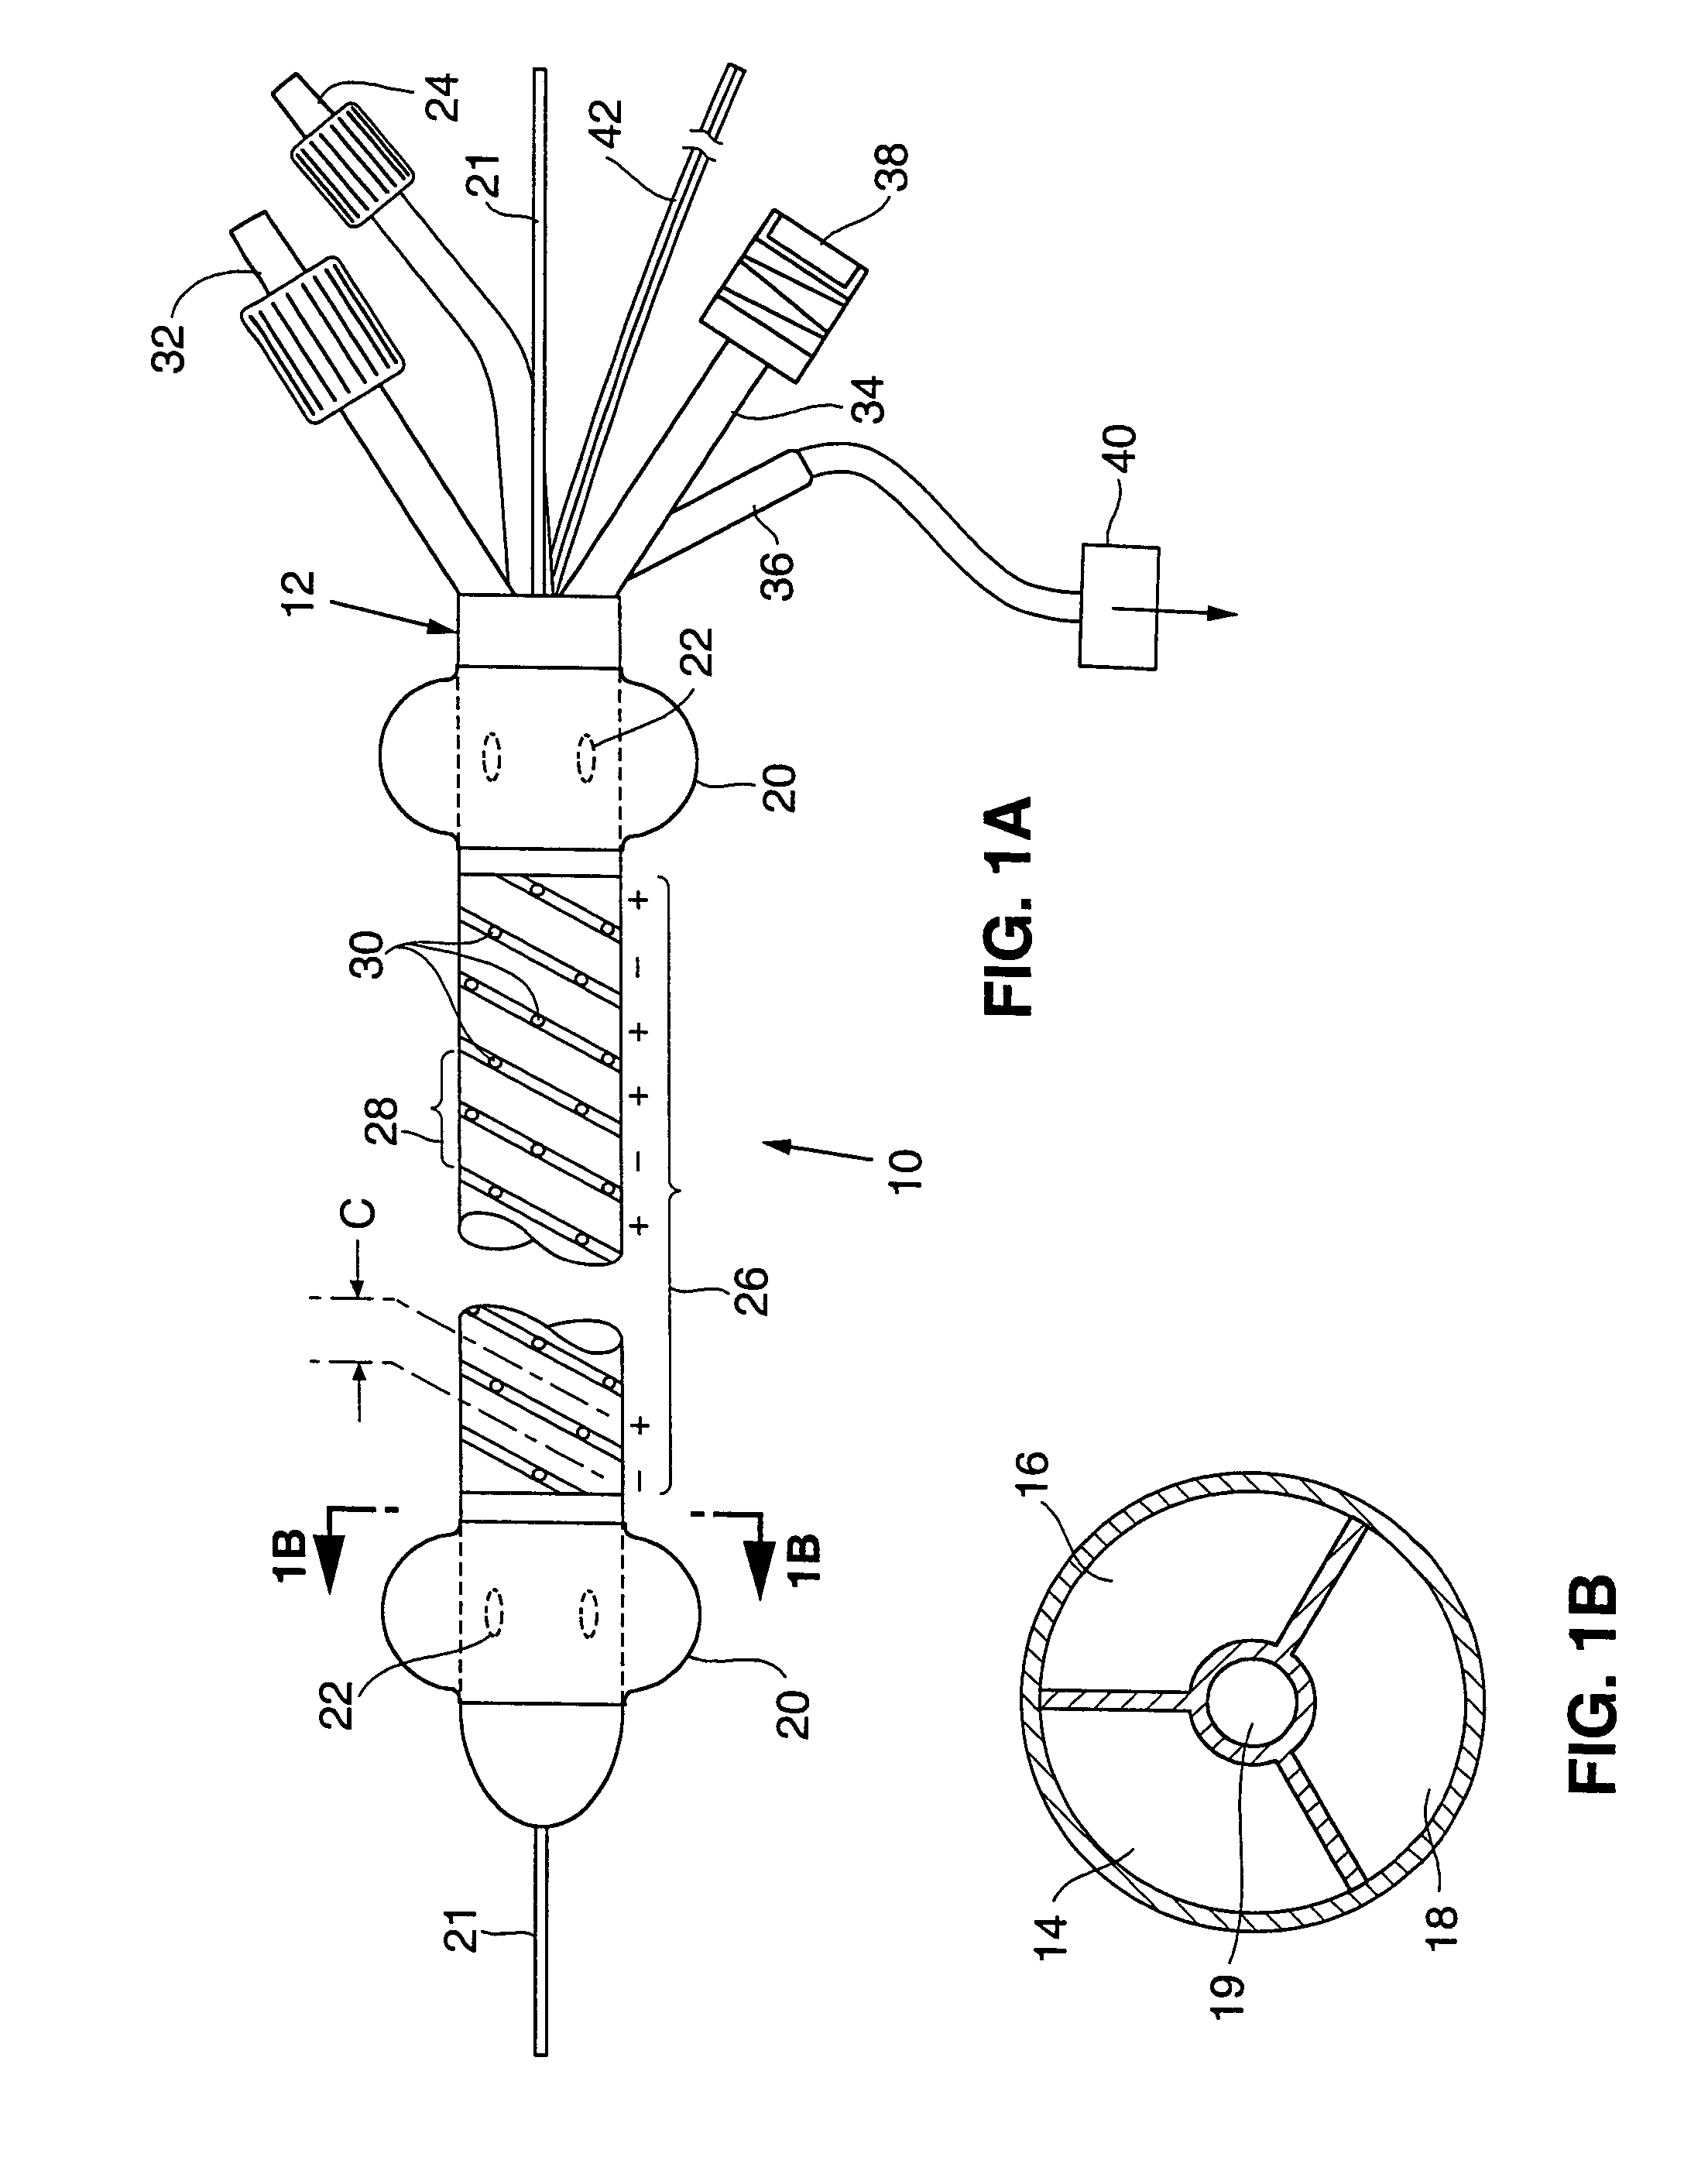 Apparatus and method for treating venous reflux